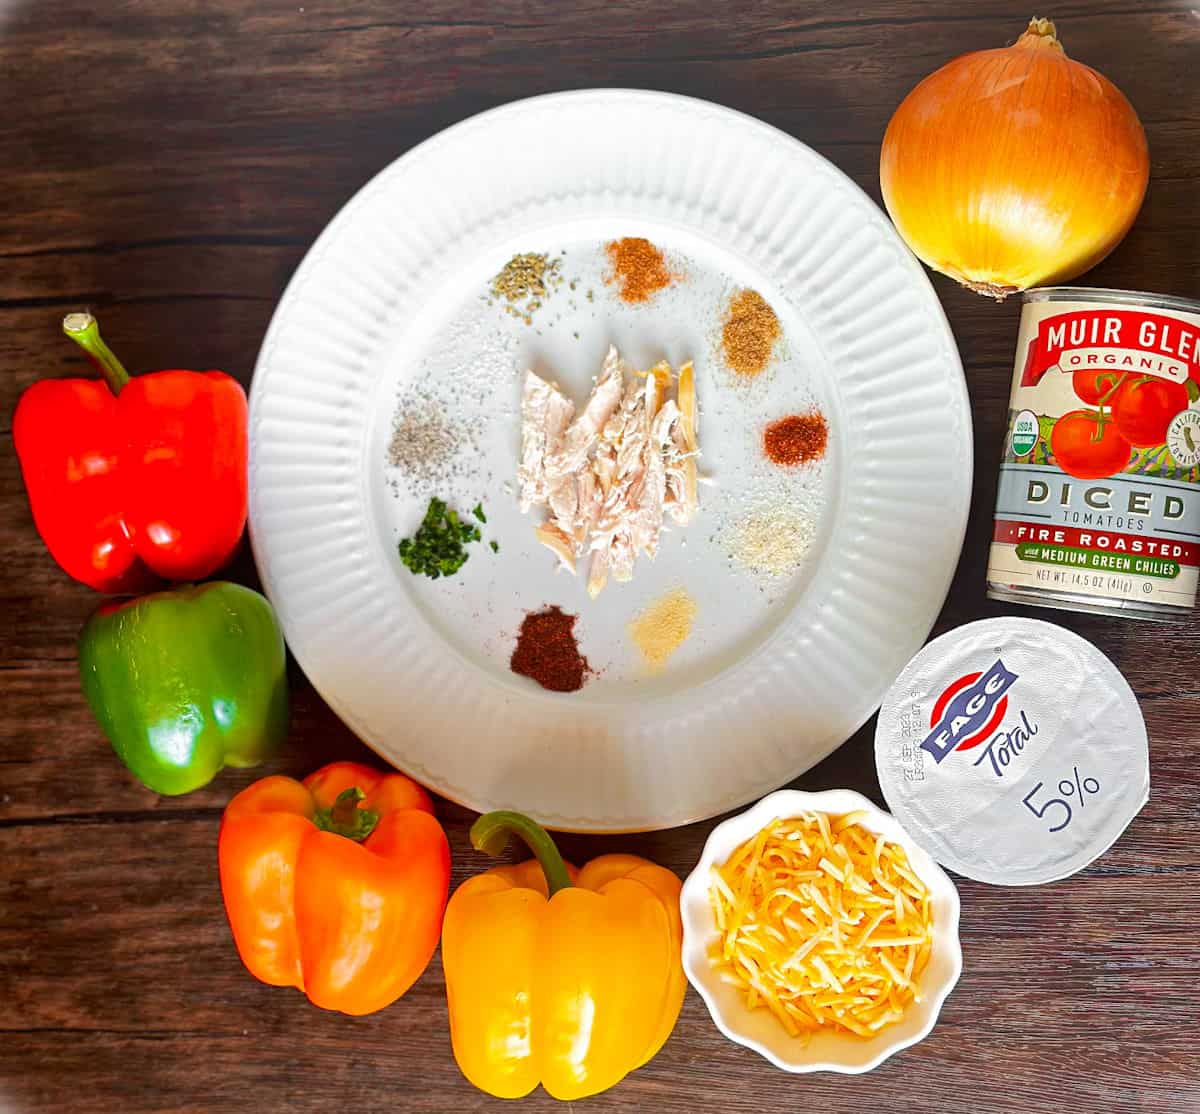 Photo of ingredients for chicken fajita casserole with a green, yellow, orange, and red bell pepper, a ramekin of shredded cheese, a container of Fage 5% yogurt, a can of diced tomatoes fire roasted with medium green chiles and a yellow onion surrounding a white plate with shredded chicken in the middle and various spices that make up the homemade fajita seasoning for this recipe.